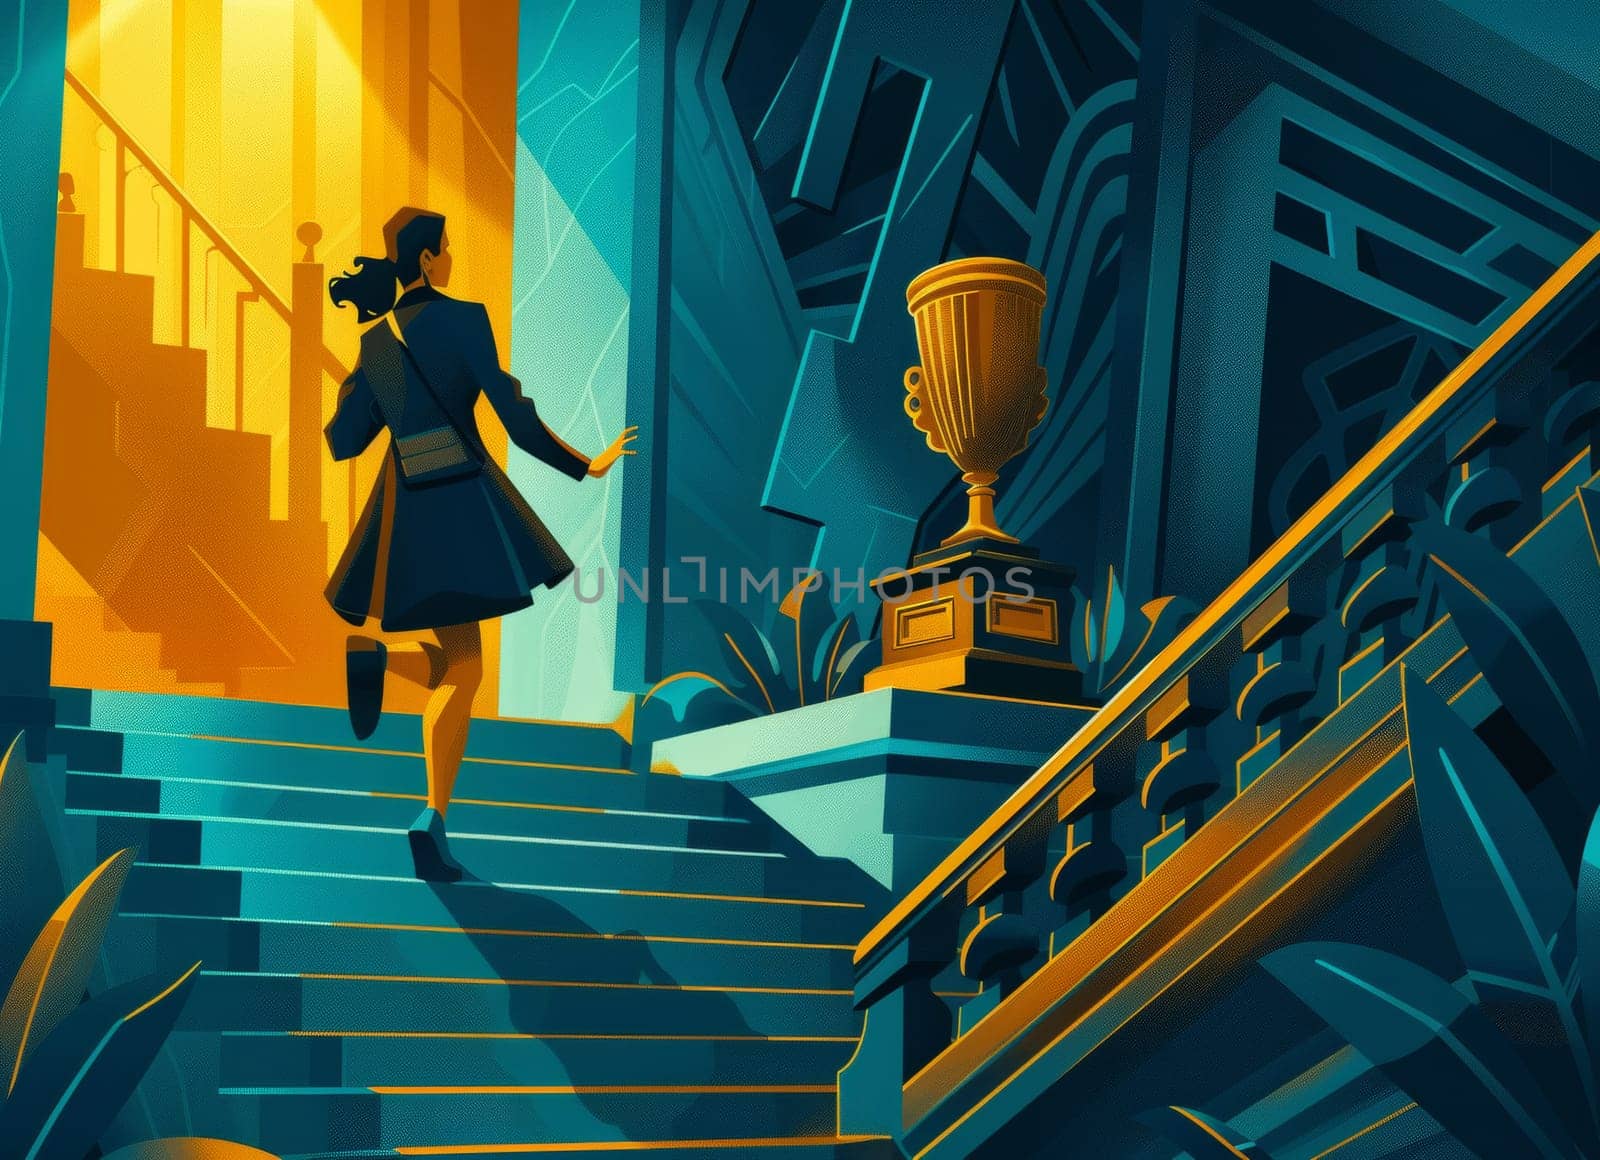 Vibrant red-toned illustration of a girl racing up a staircase with a trophy